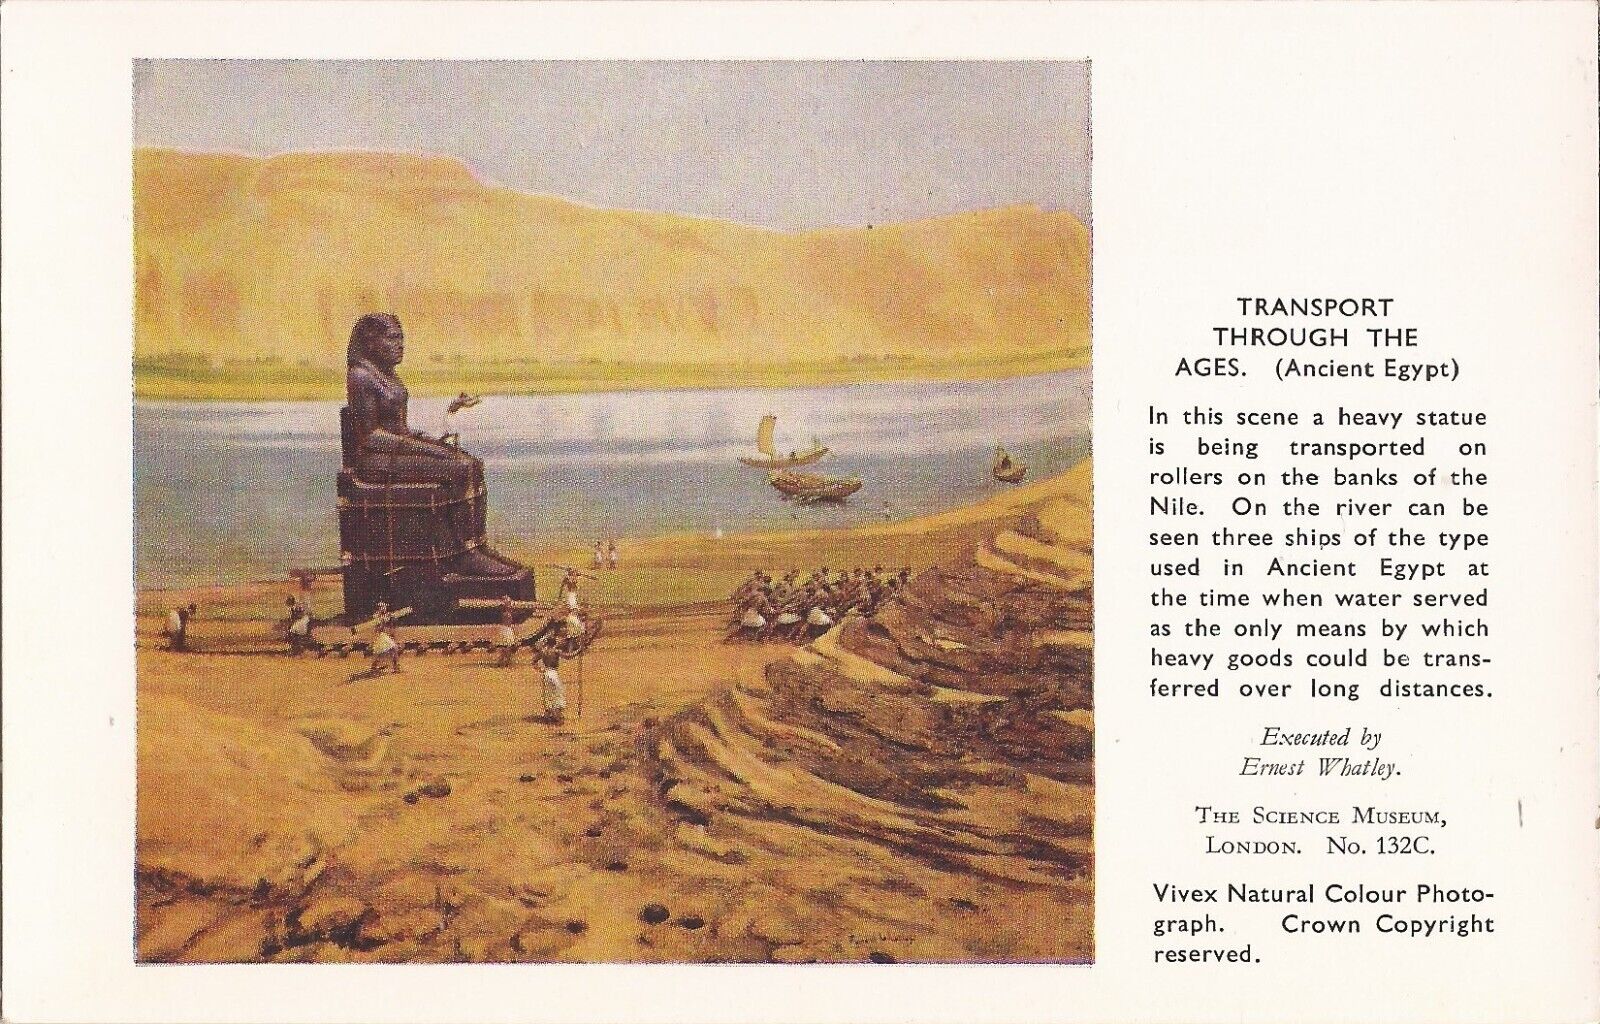 ART: E. Whatley: Transport Through the Ages (Ancient Egypt) - London, ENGLAND